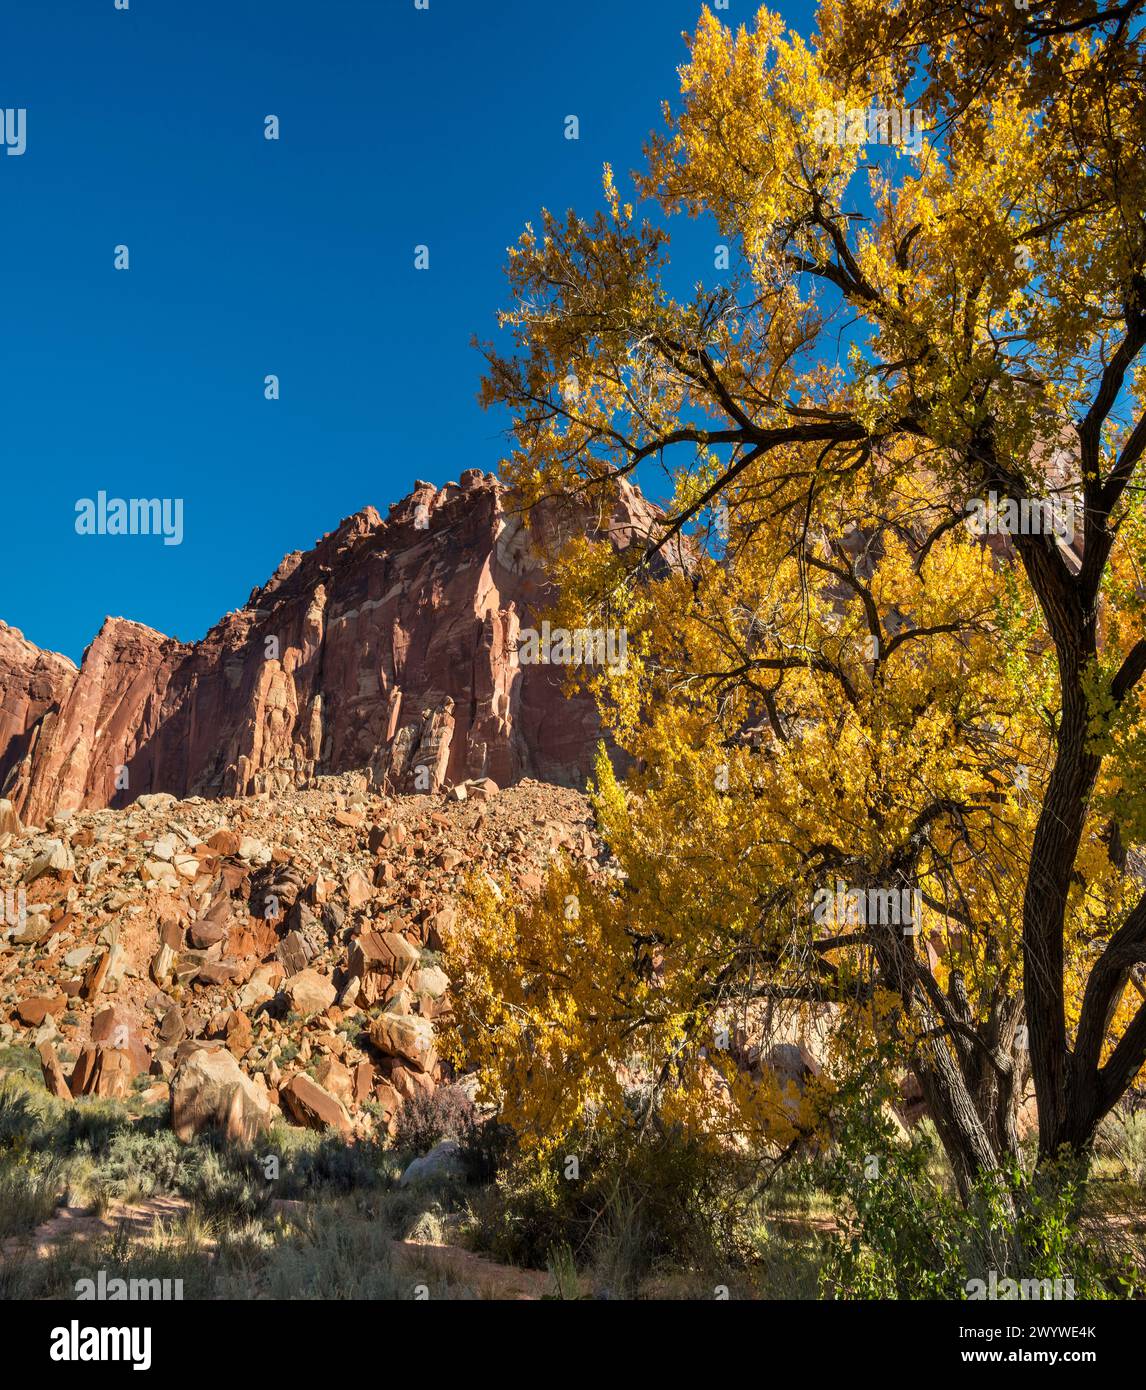 Fremont's cottonwood tree in autumn colors, riparian zone at Fremont Gorge in Capitol Reef National Park, Utah, USA Stock Photo